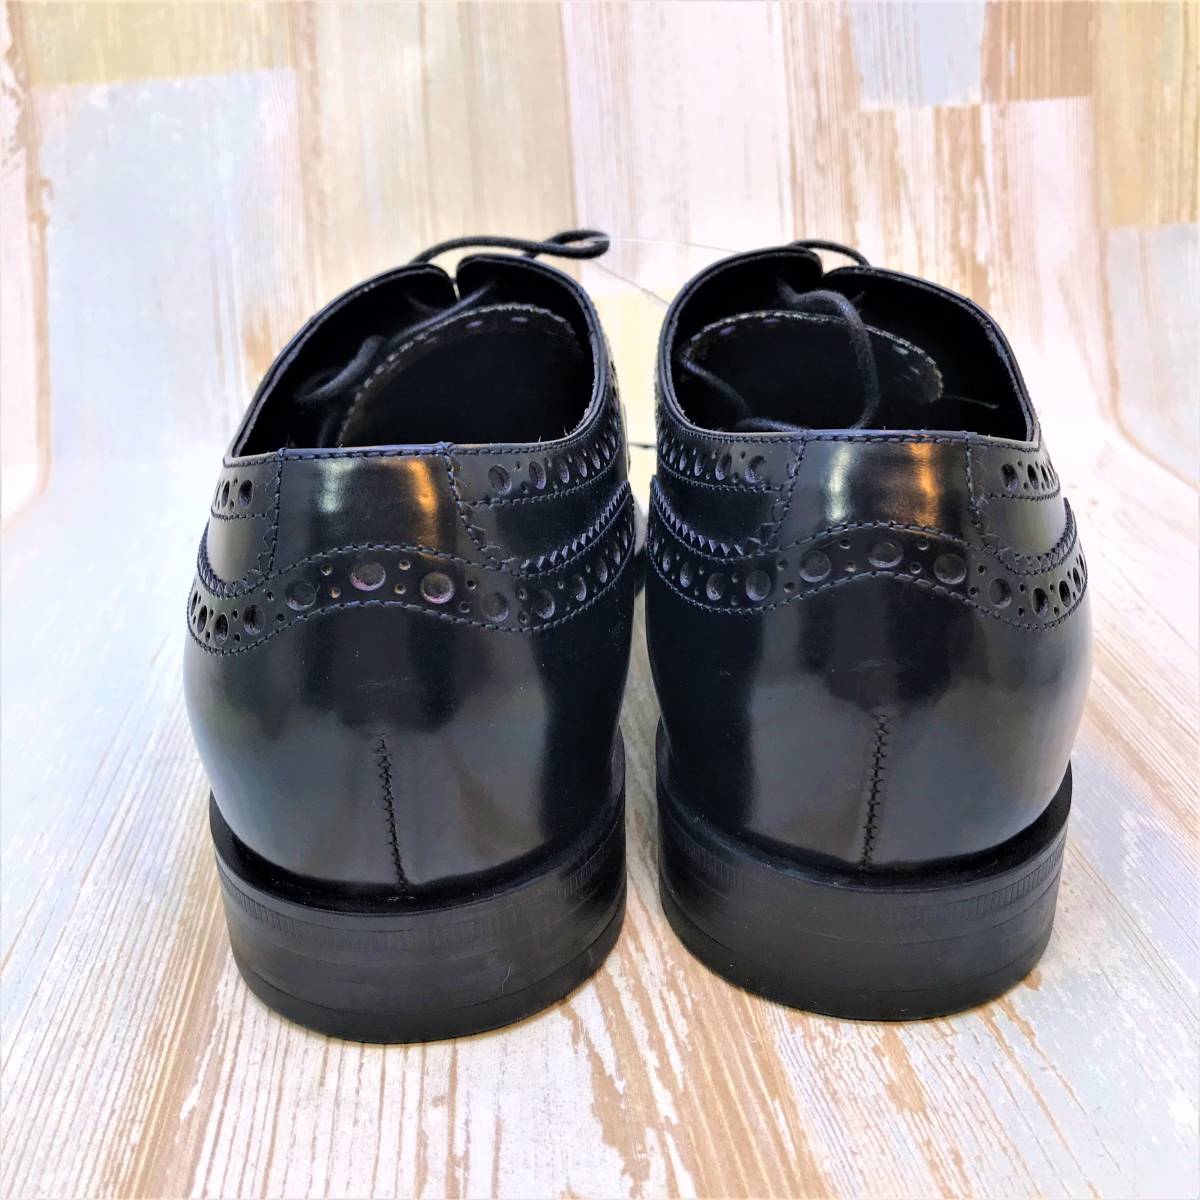  new goods *GIORGIO ARMANIjoru geo Armani wing chip leather shoes business shoes black color black * approximately 24cm US6 size 40 size 